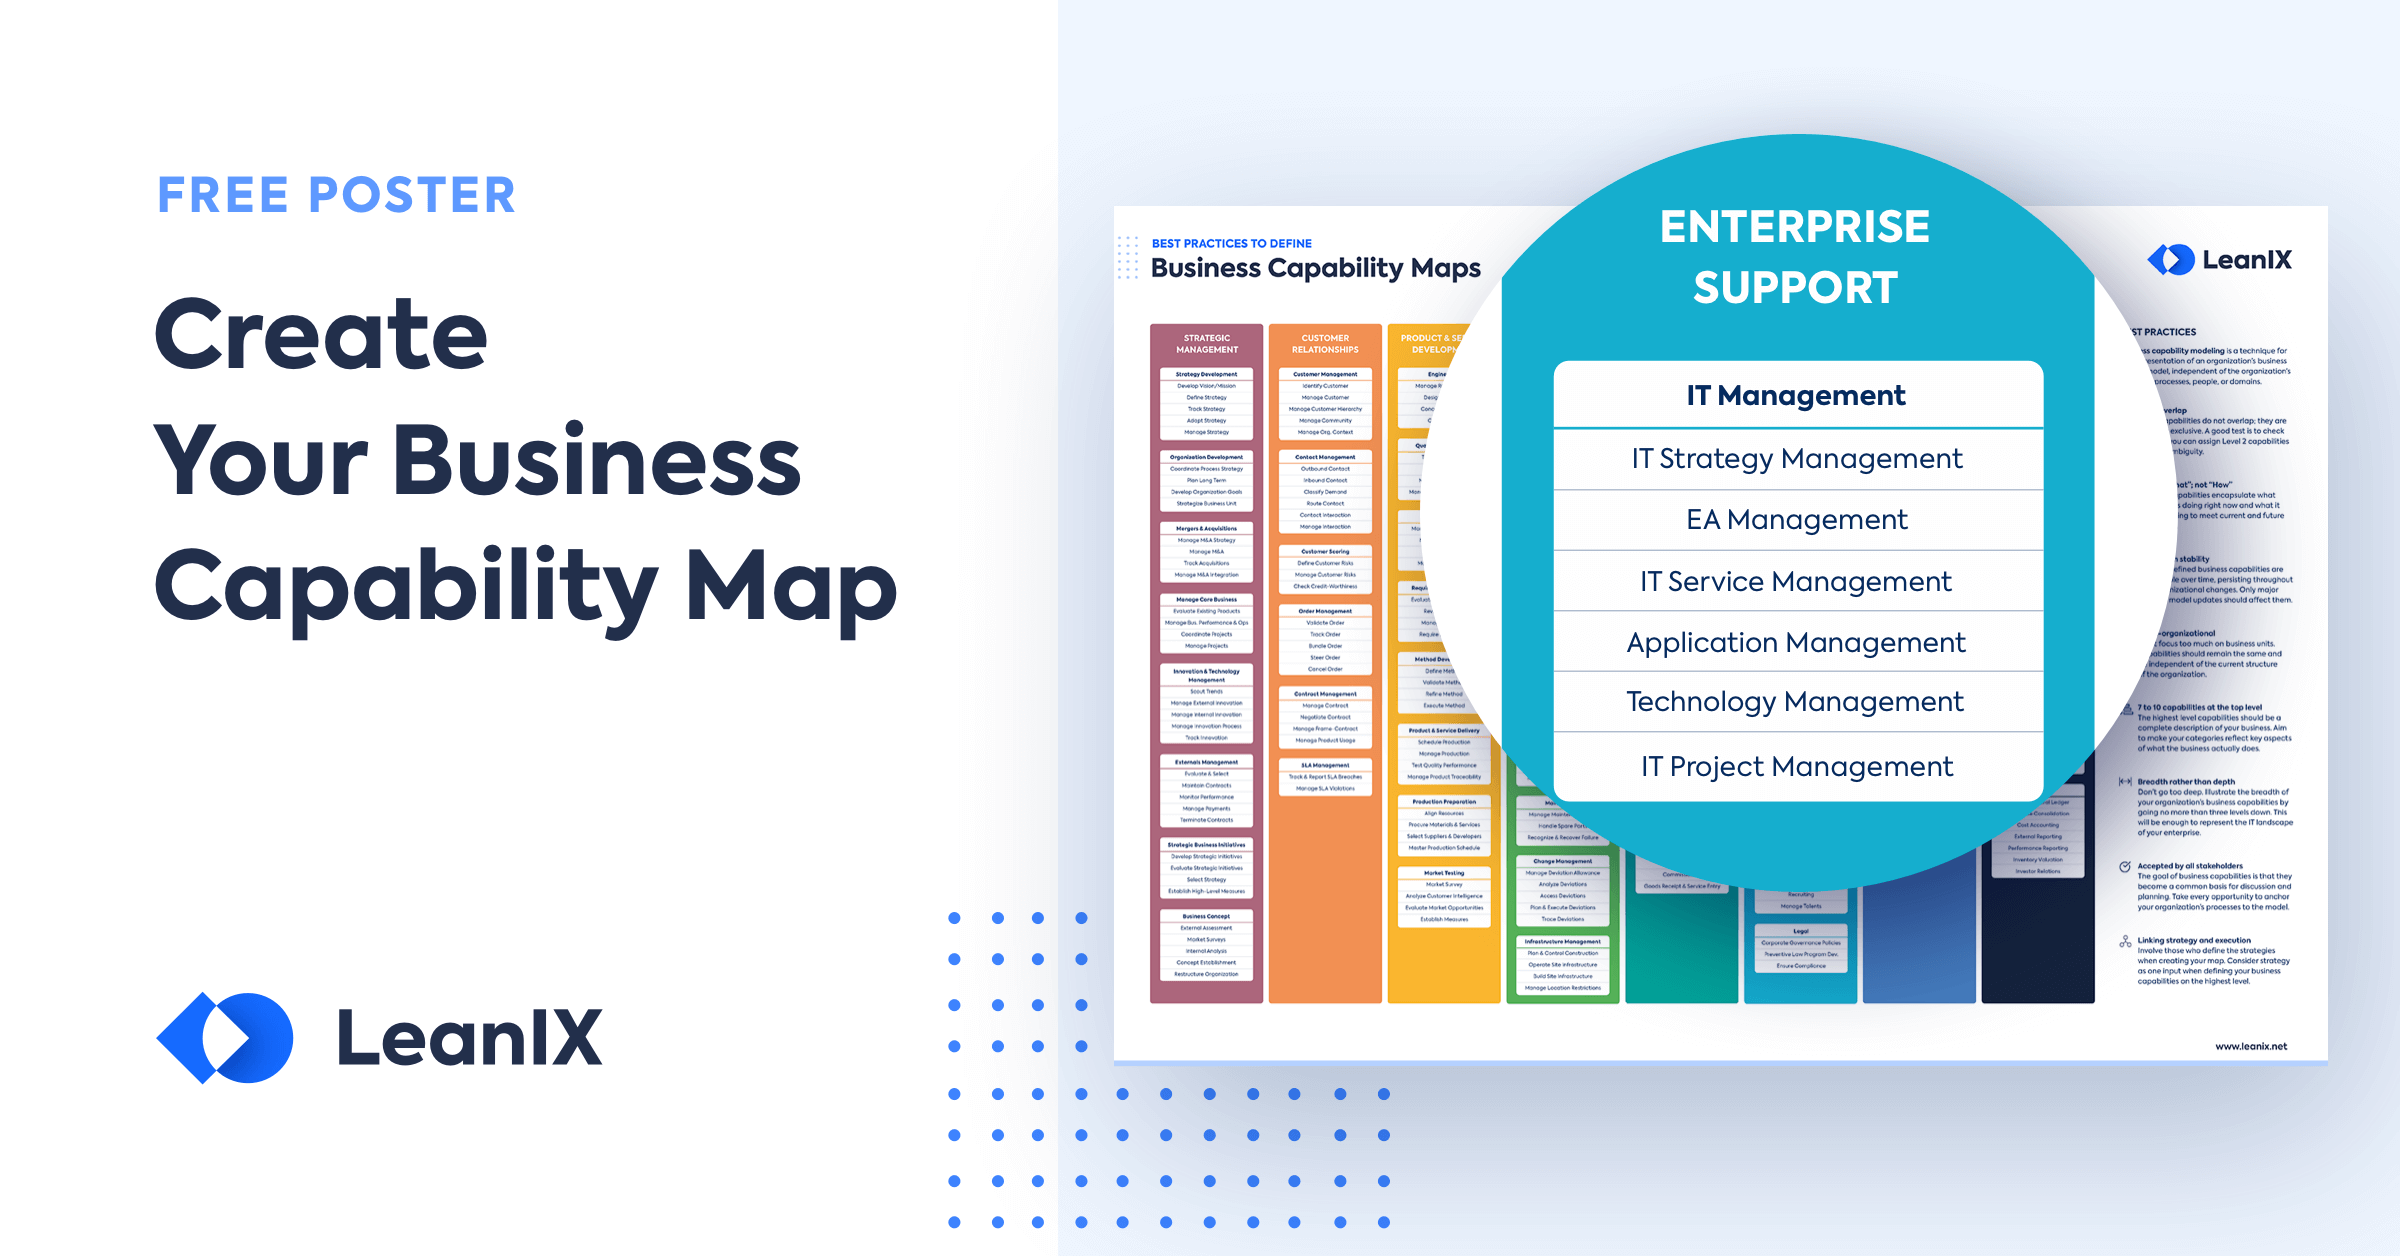 Best Practices to Define Business Capability Maps and Models For Business Capability Map Template